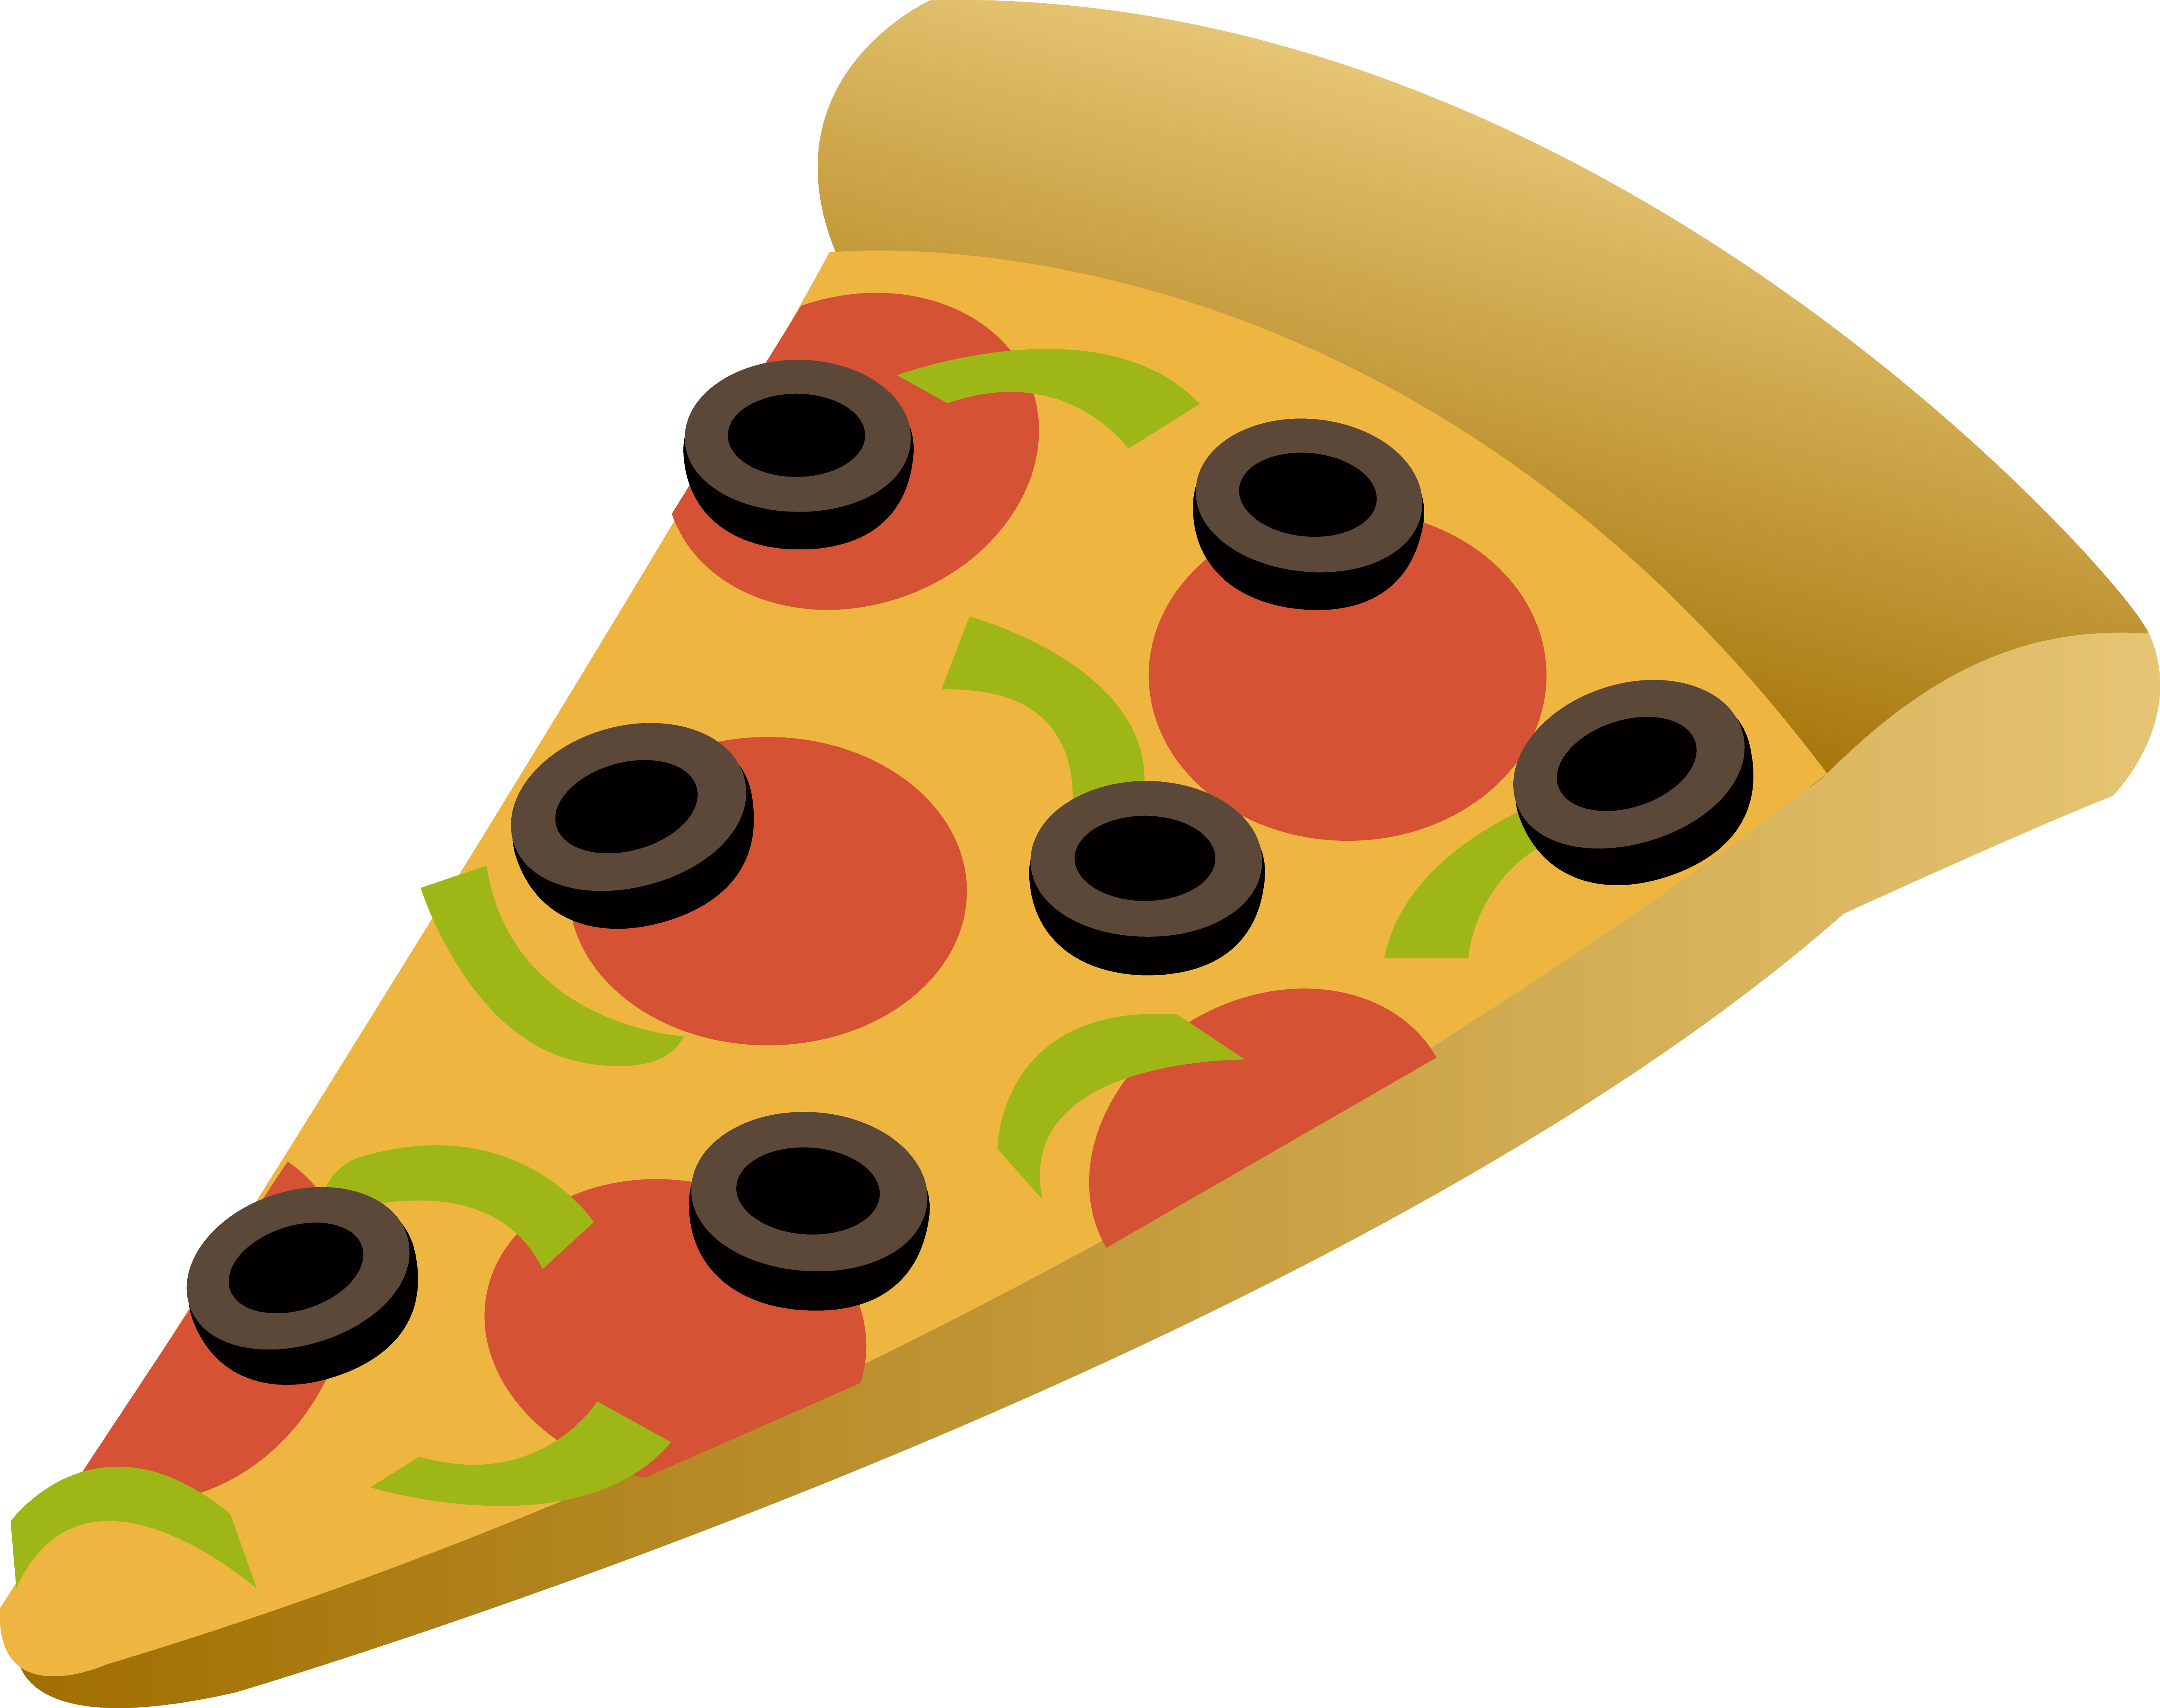 Free pizza vector.